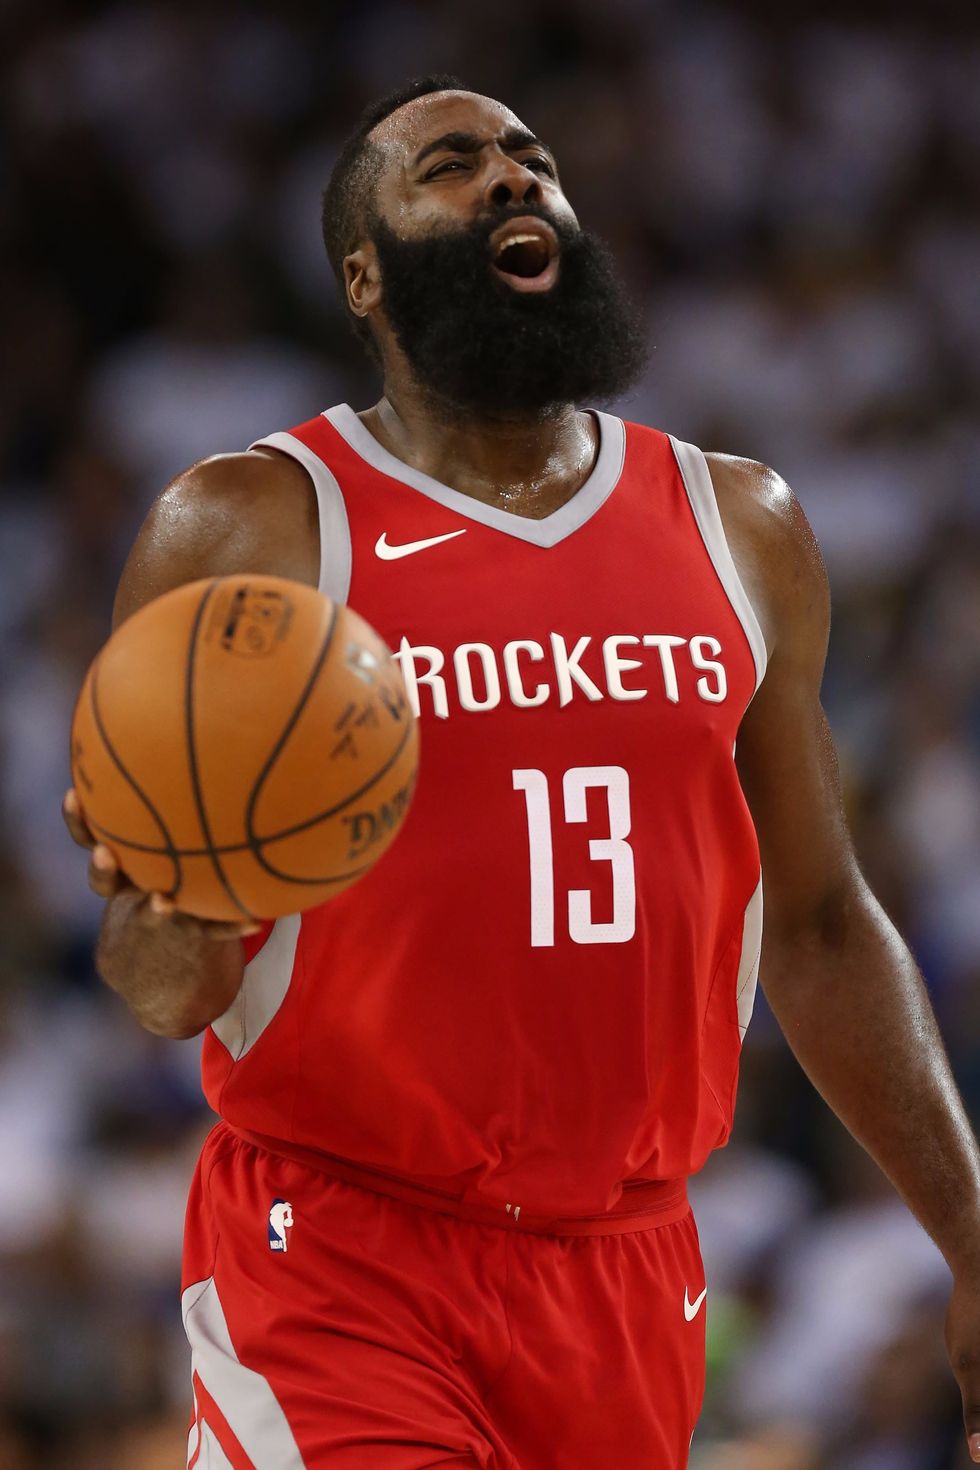 Joel Blank: Rockets will live or die based on whether or not "Elimination James" shows up